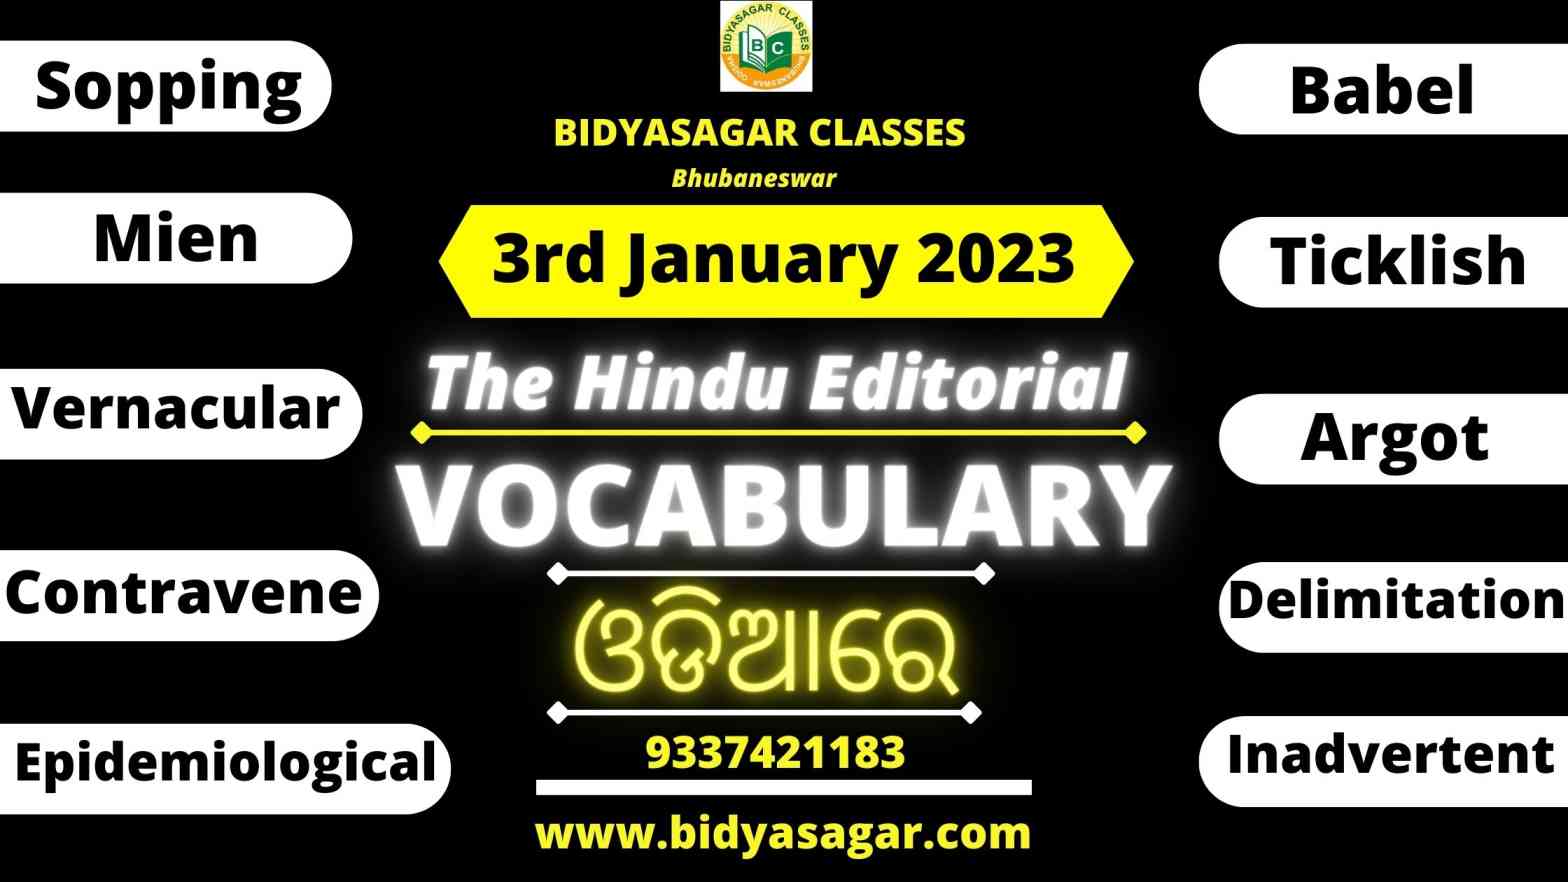 The Hindu Editorial Vocabulary of 3rd January 2023